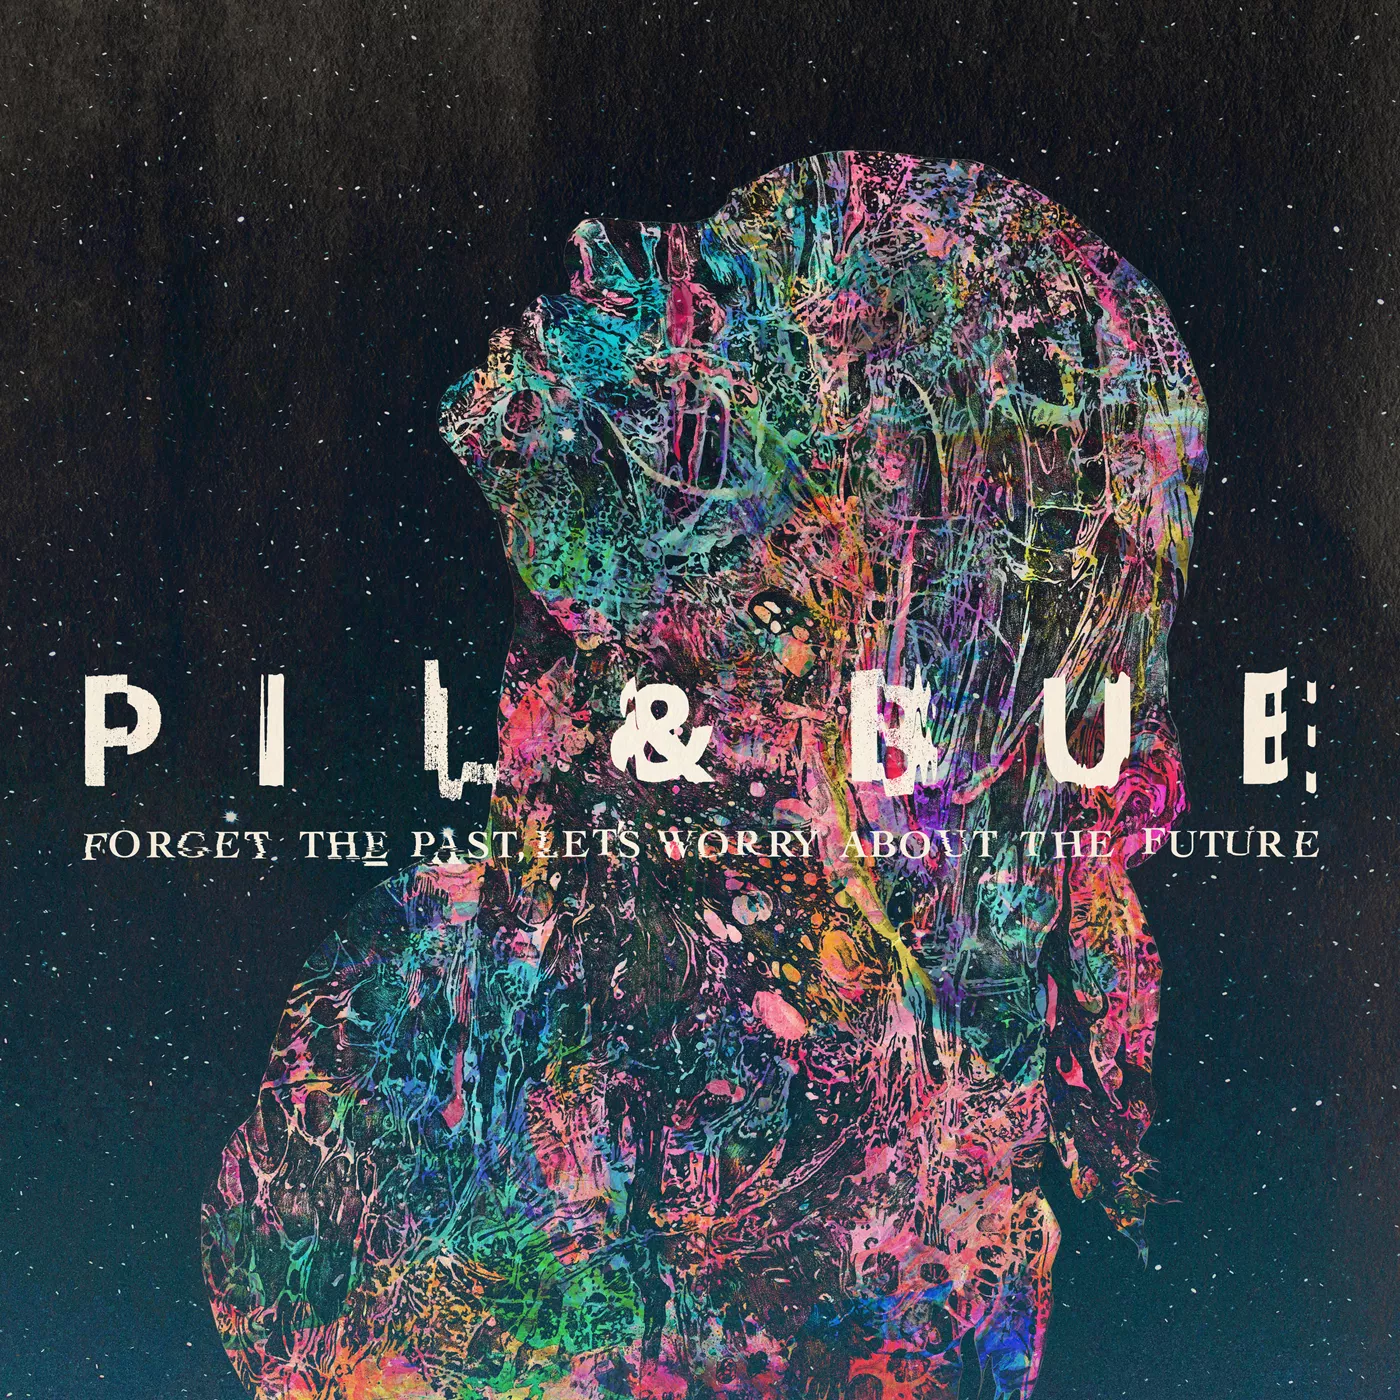 Forget The Past, Let's Worry About The Future - Pil & Bue